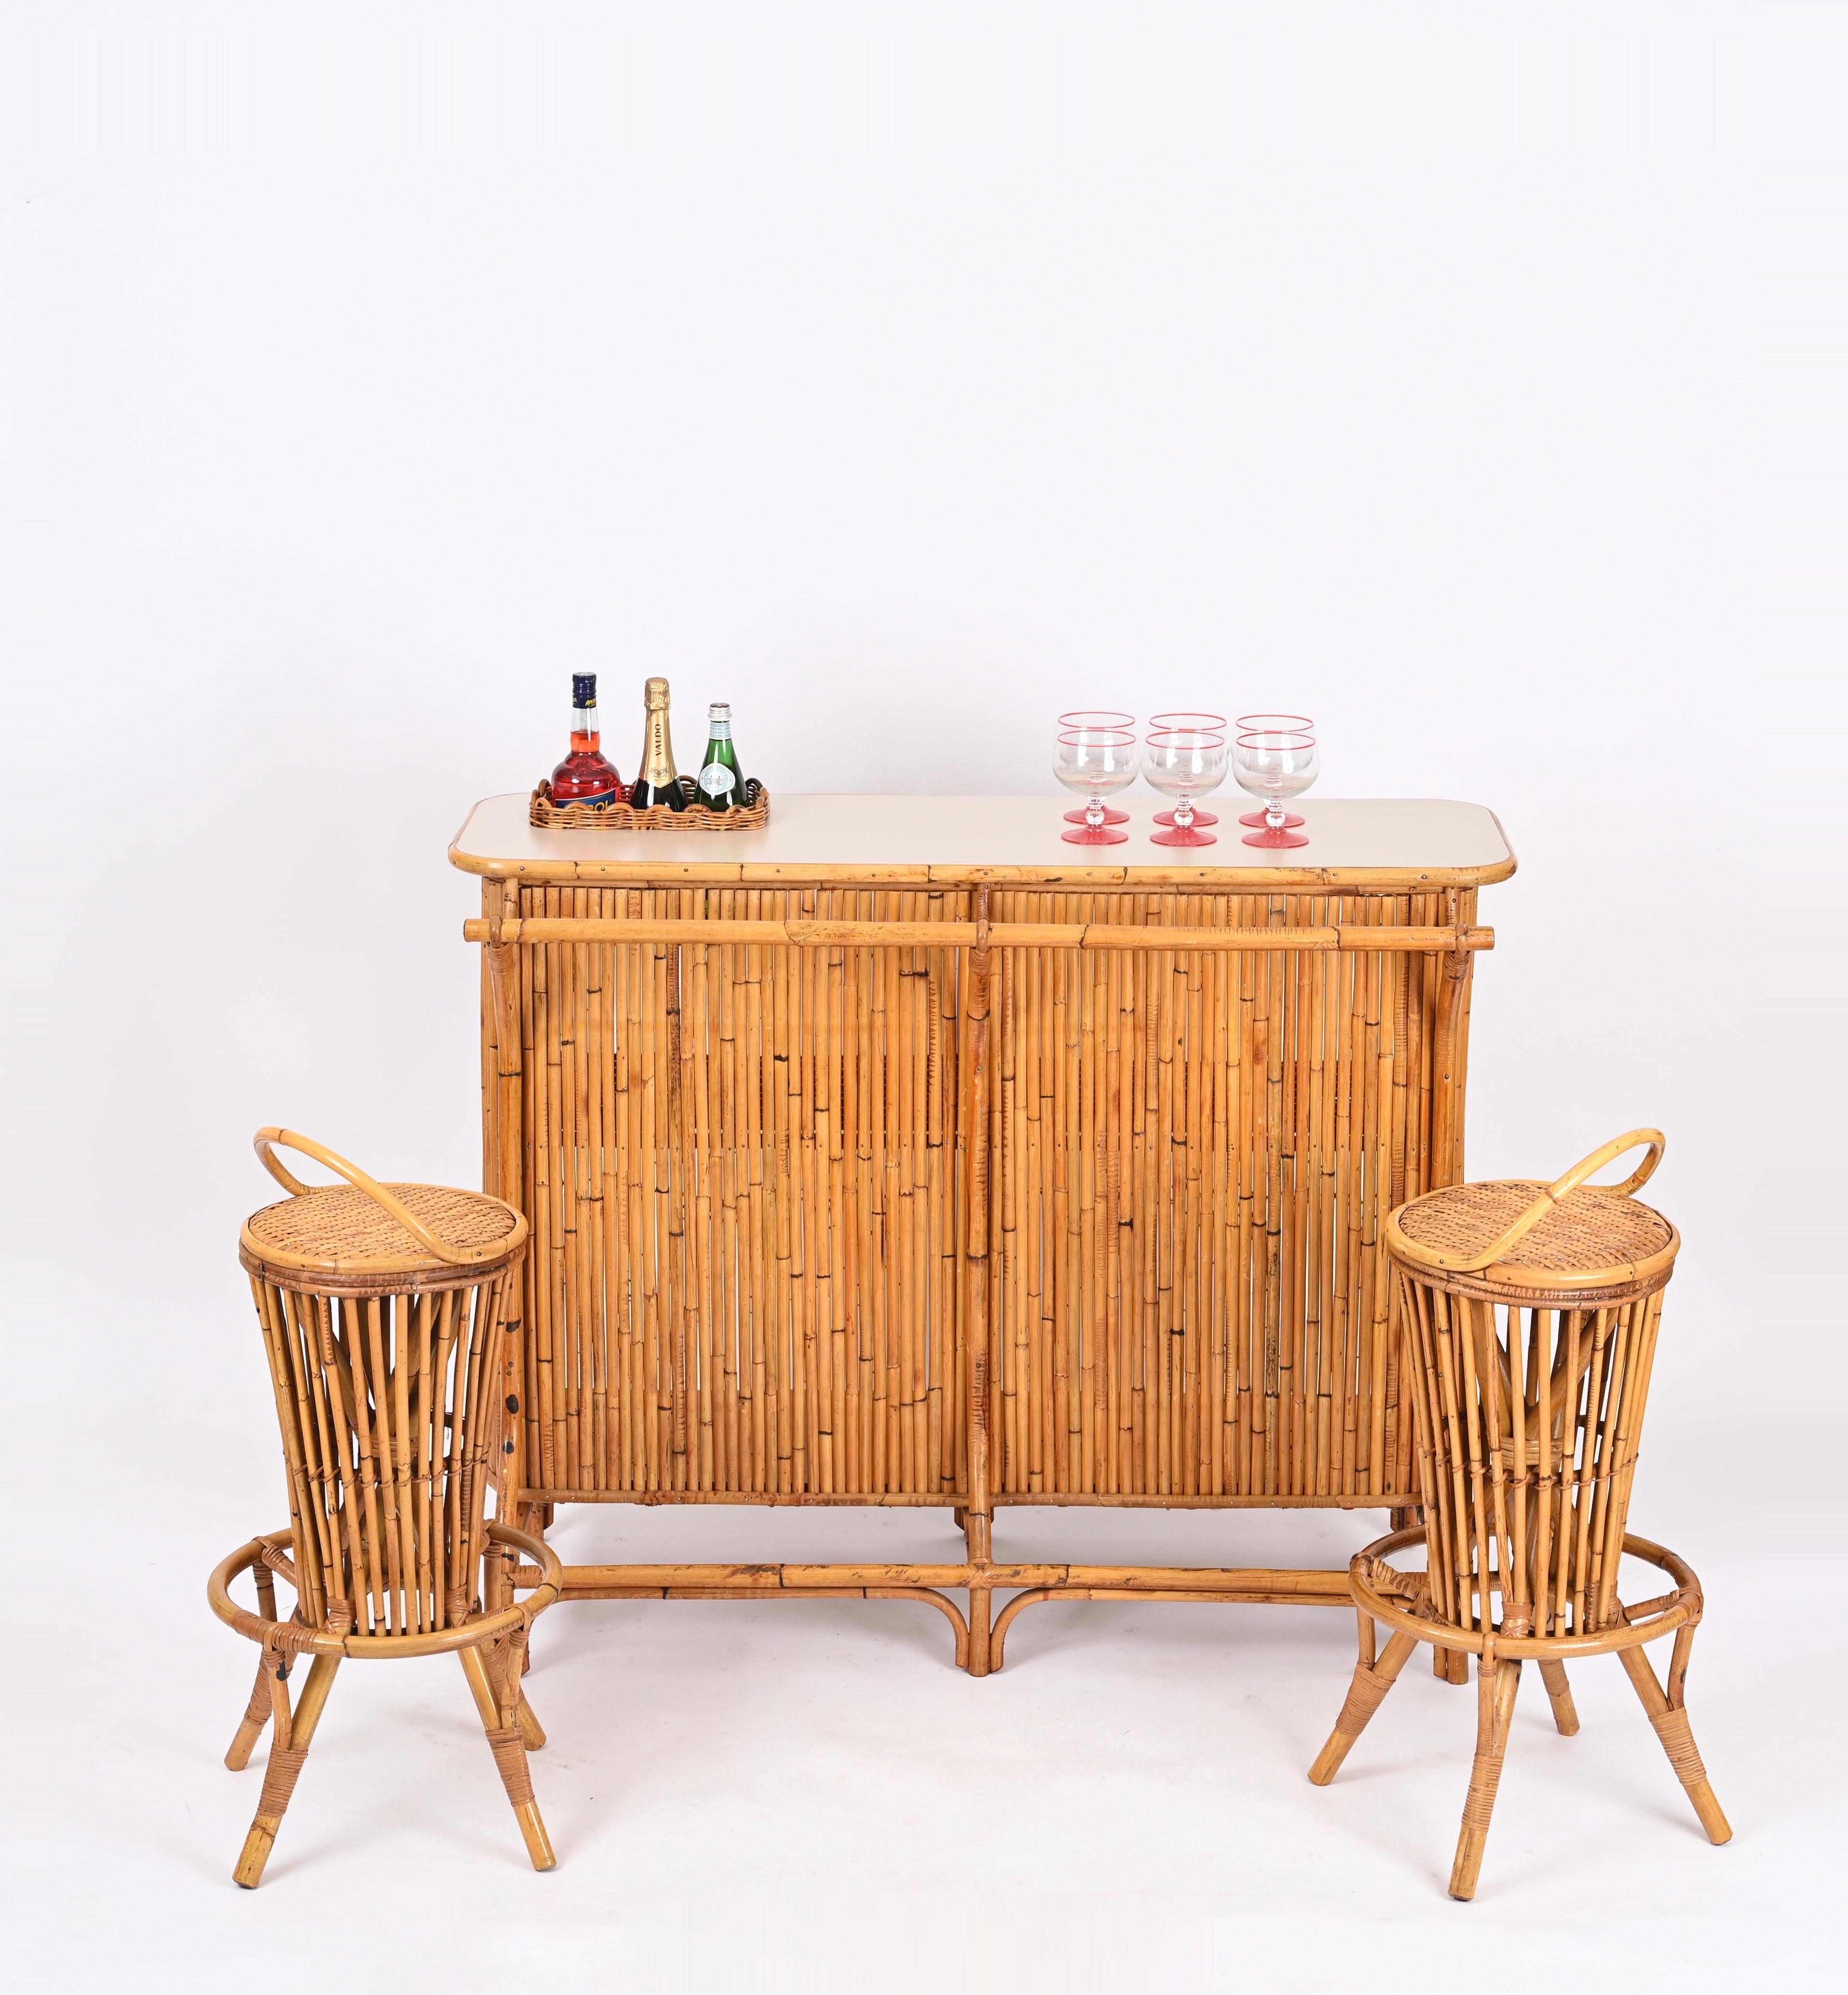 Mid-Century Modern Dry Bar with Two Stools in Rattan, Bamboo and Wicker by Tito Agnoli, Italy 1950s For Sale